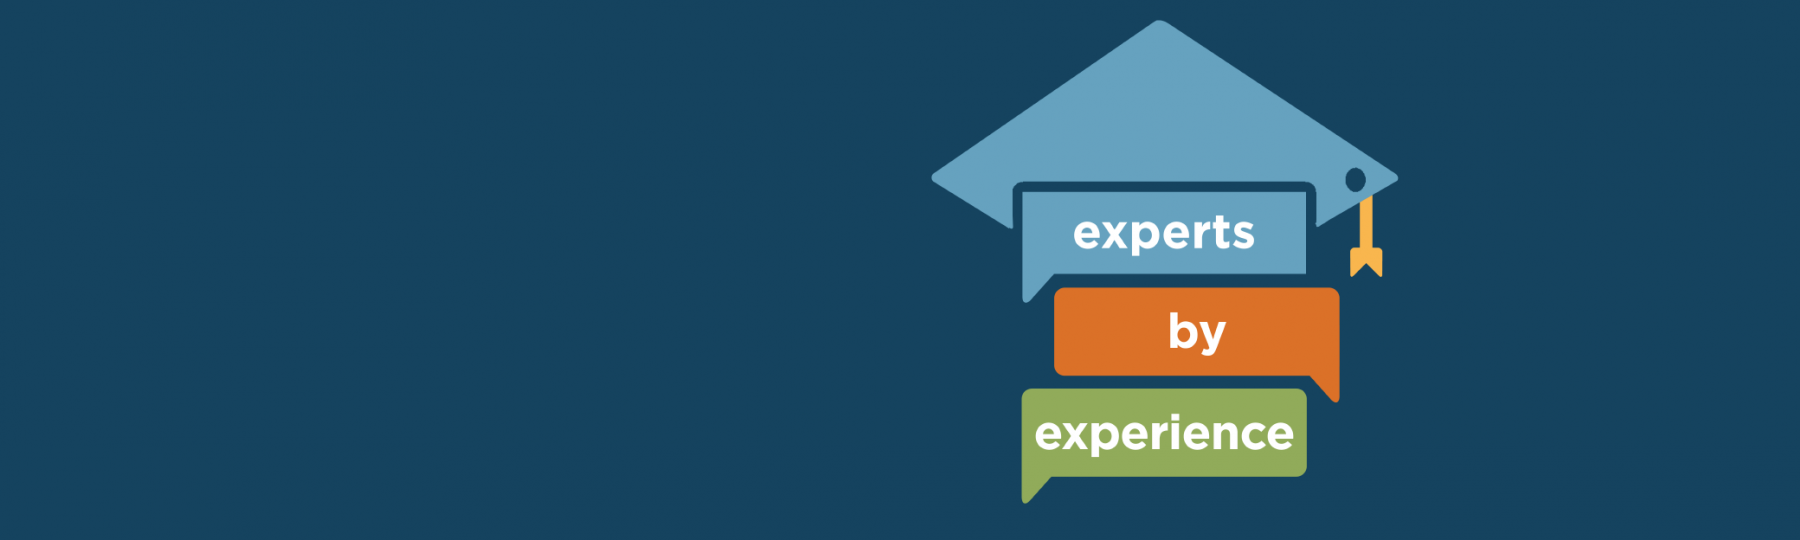 Experts by Experience logo